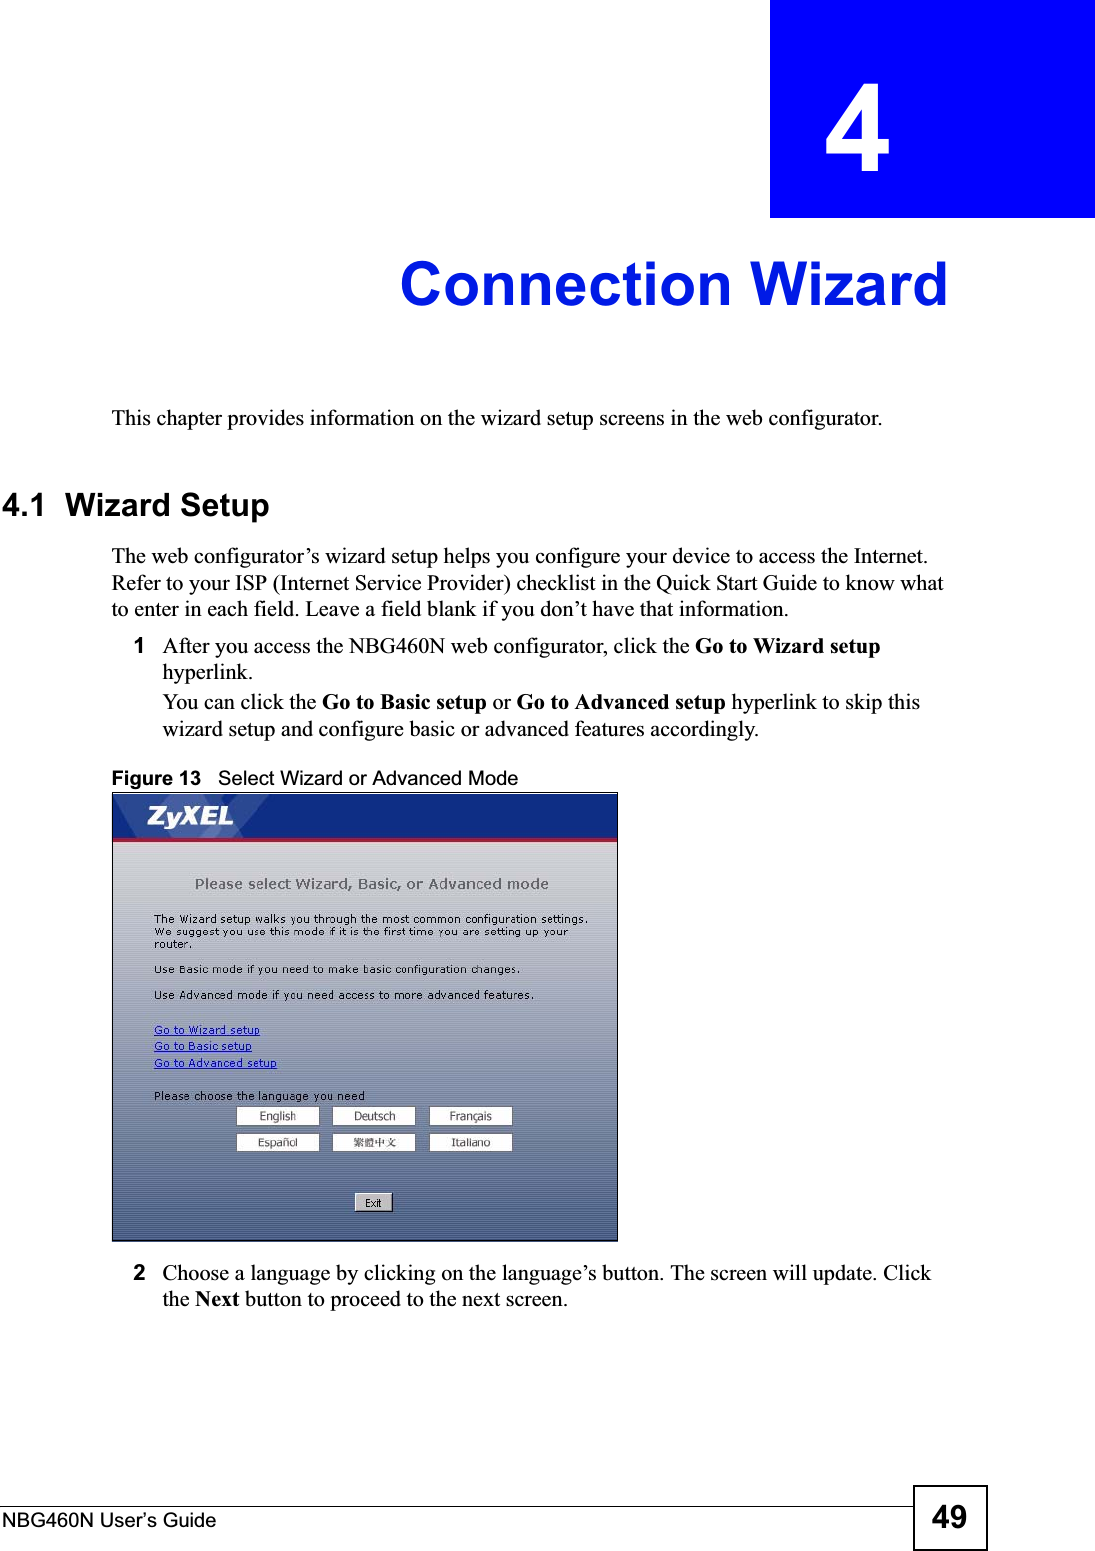 NBG460N User’s Guide 49CHAPTER  4 Connection WizardThis chapter provides information on the wizard setup screens in the web configurator.4.1  Wizard SetupThe web configurator’s wizard setup helps you configure your device to access the Internet. Refer to your ISP (Internet Service Provider) checklist in the Quick Start Guide to know what to enter in each field. Leave a field blank if you don’t have that information.1After you access the NBG460N web configurator, click the Go to Wizard setuphyperlink.You can click the Go to Basic setup or Go to Advanced setup hyperlink to skip this wizard setup and configure basic or advanced features accordingly.Figure 13   Select Wizard or Advanced Mode2Choose a language by clicking on the language’s button. The screen will update. Click the Next button to proceed to the next screen.